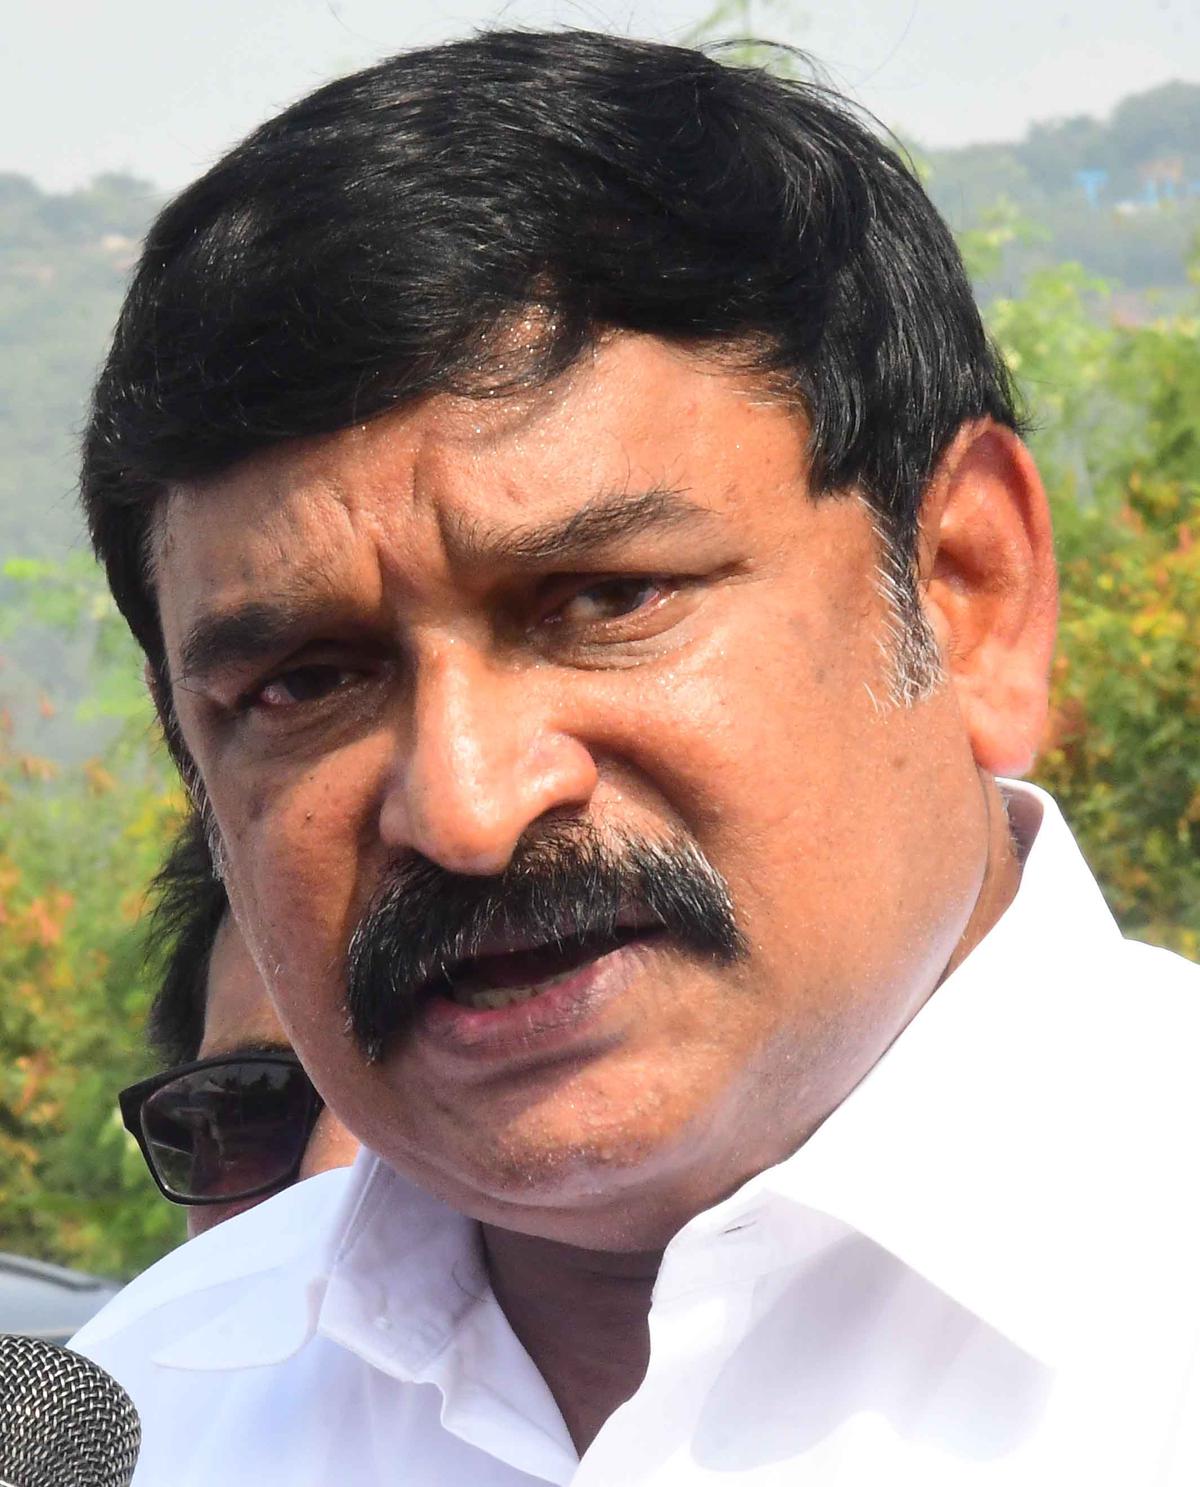 Andhra Pradesh: women were insulted at Chief Minister’s meet, alleges former BJP MLA